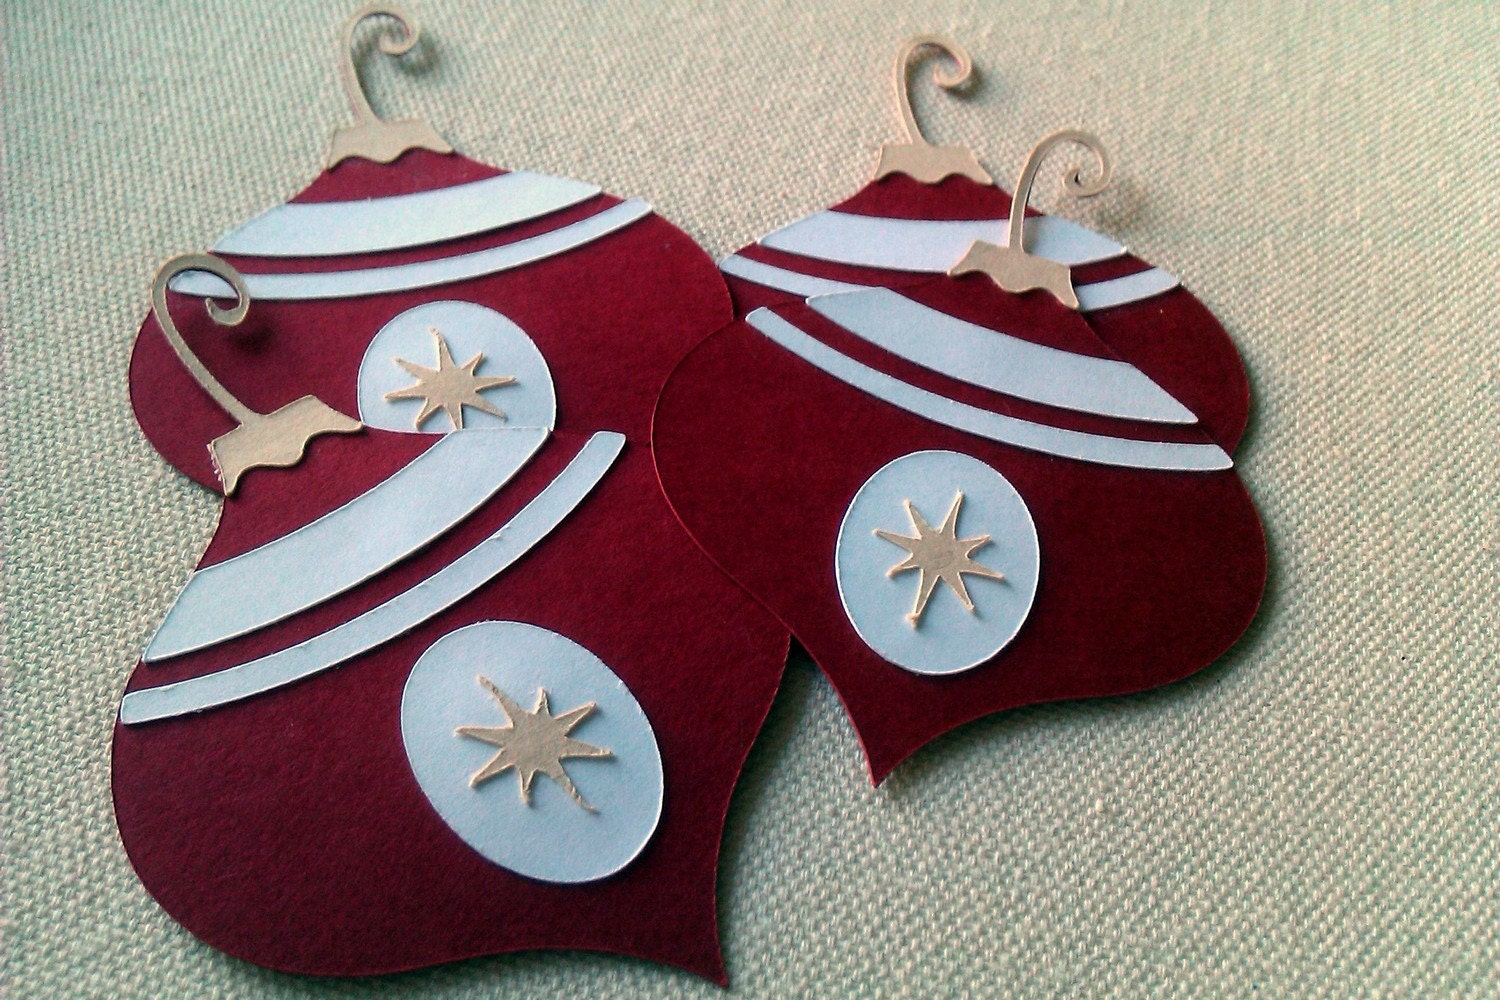 Dark Red, White, and Tan Holiday Ornament - use as gift tag or embellishment